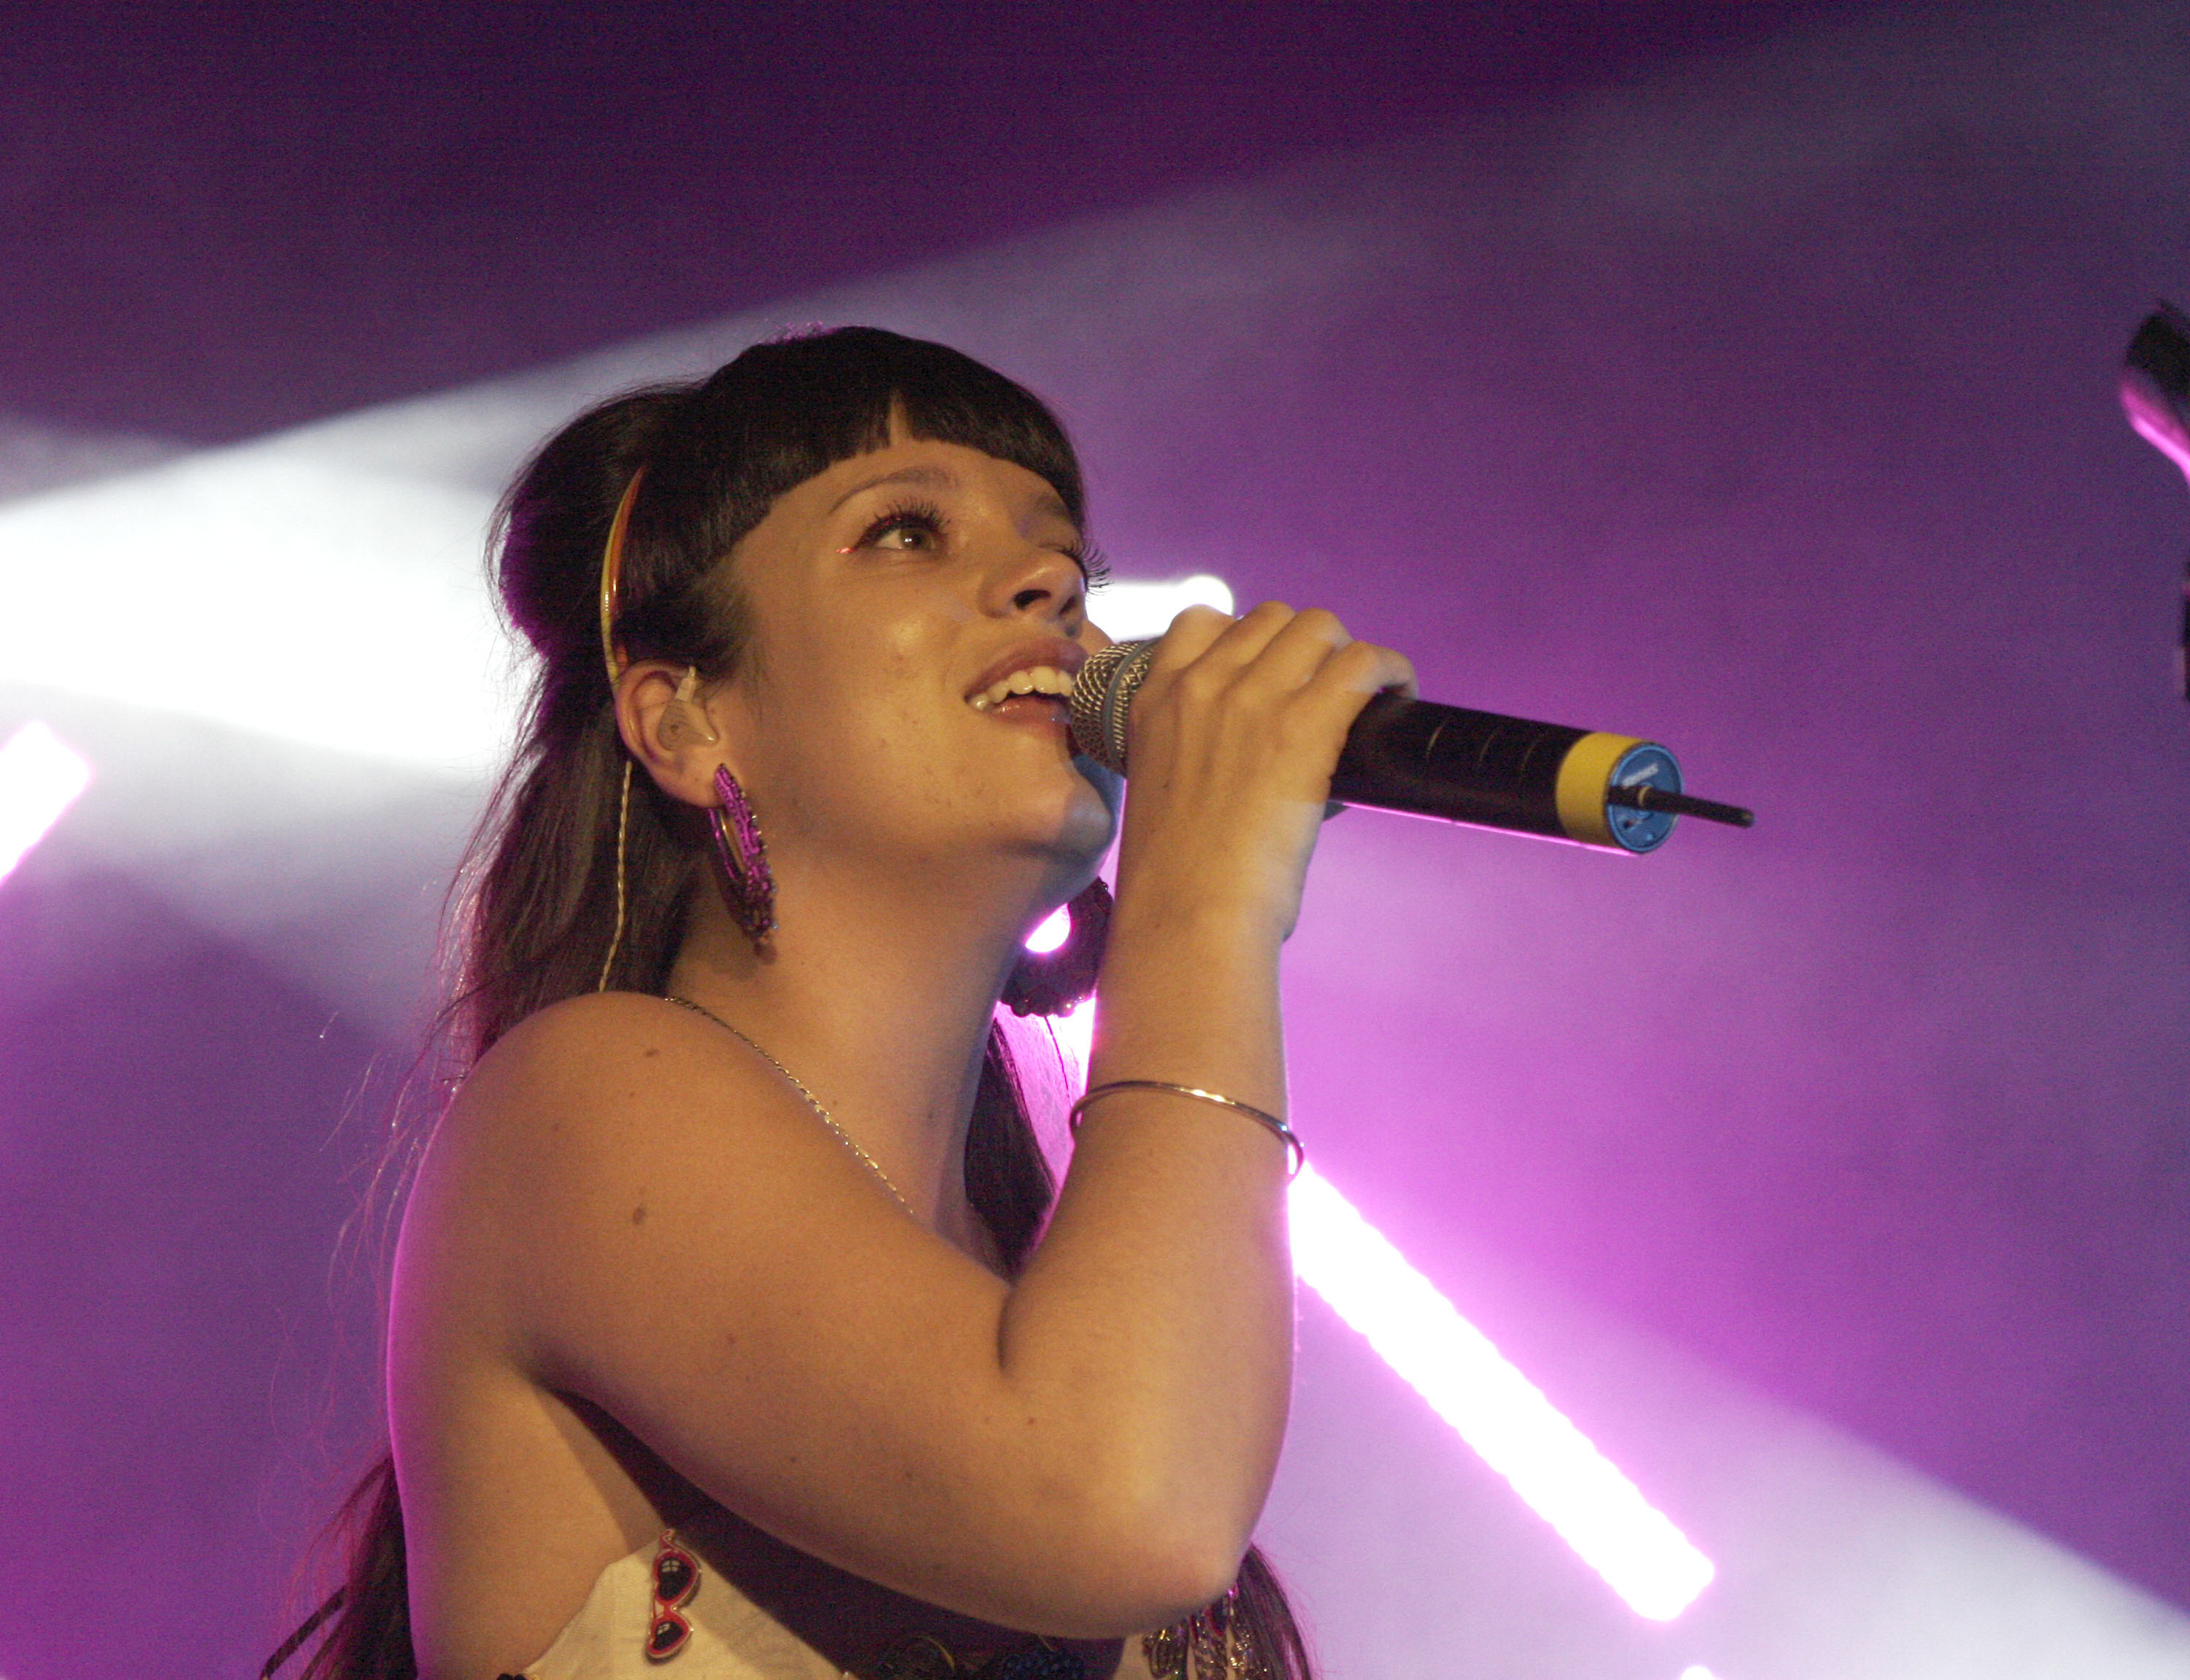 Lily Allen performing on stage with a microphone. She wears a sleeveless top and has a headband